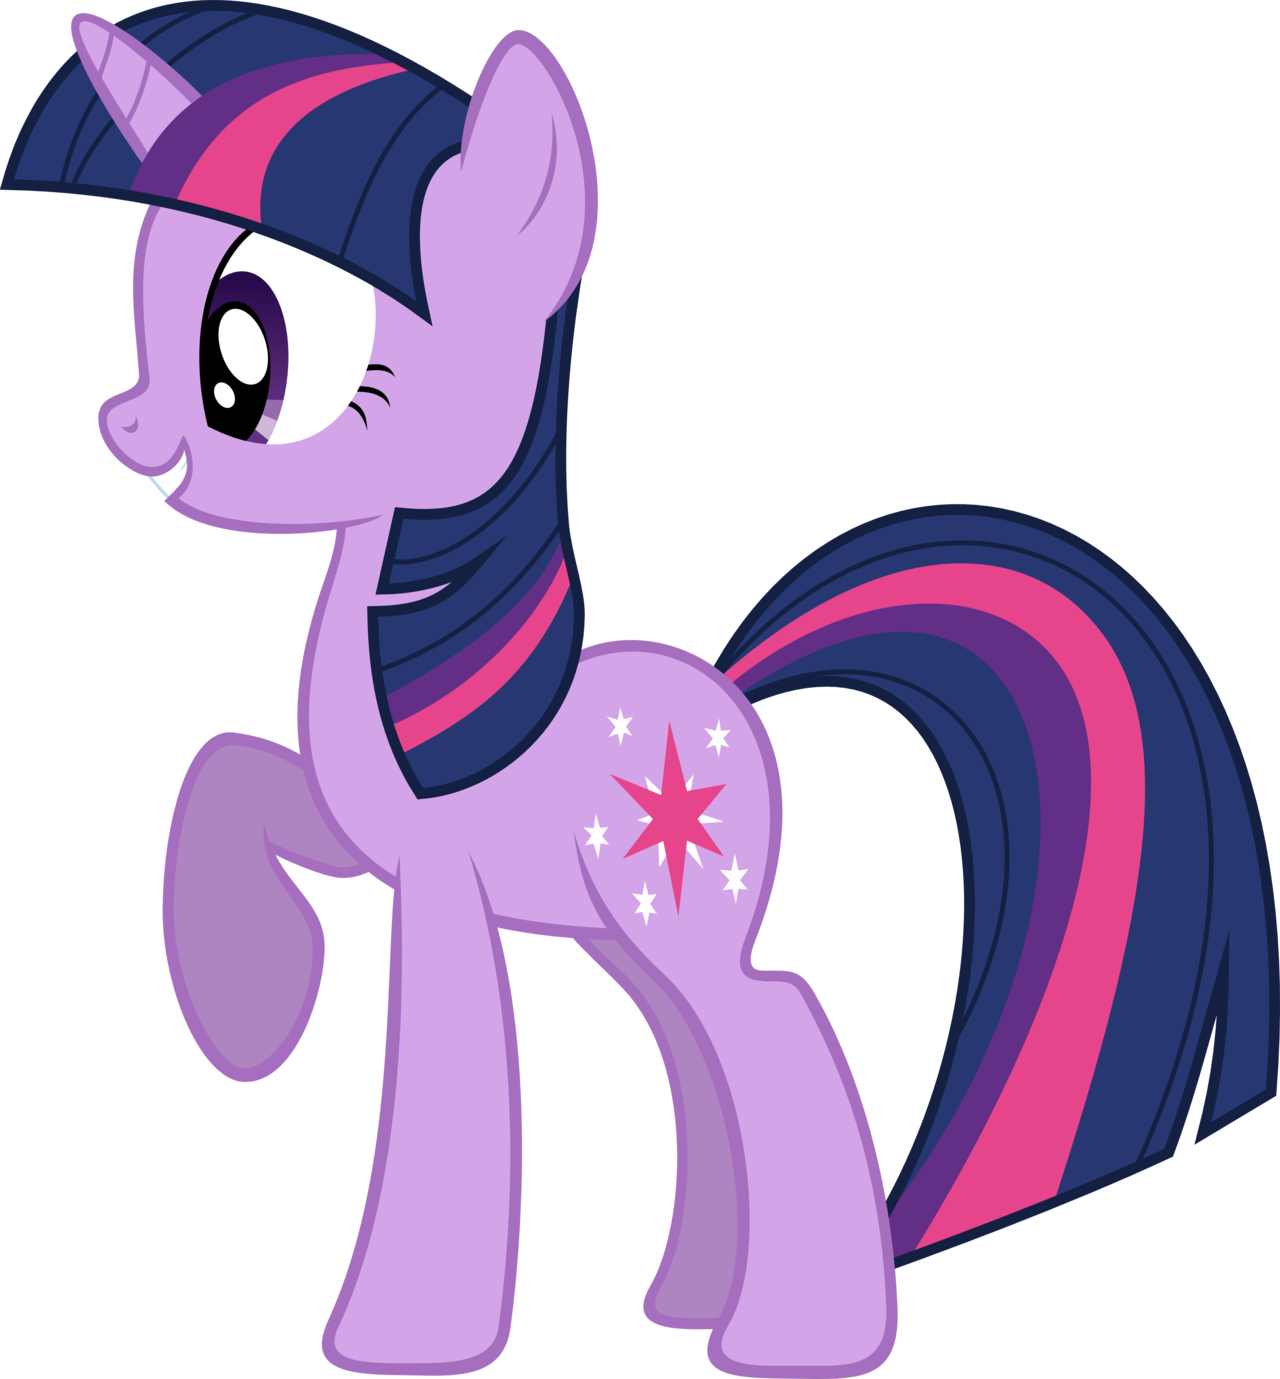 Twilight Sparkle Is Ready For Action By - Little Pony Friendship Is Magic (1280x1379)